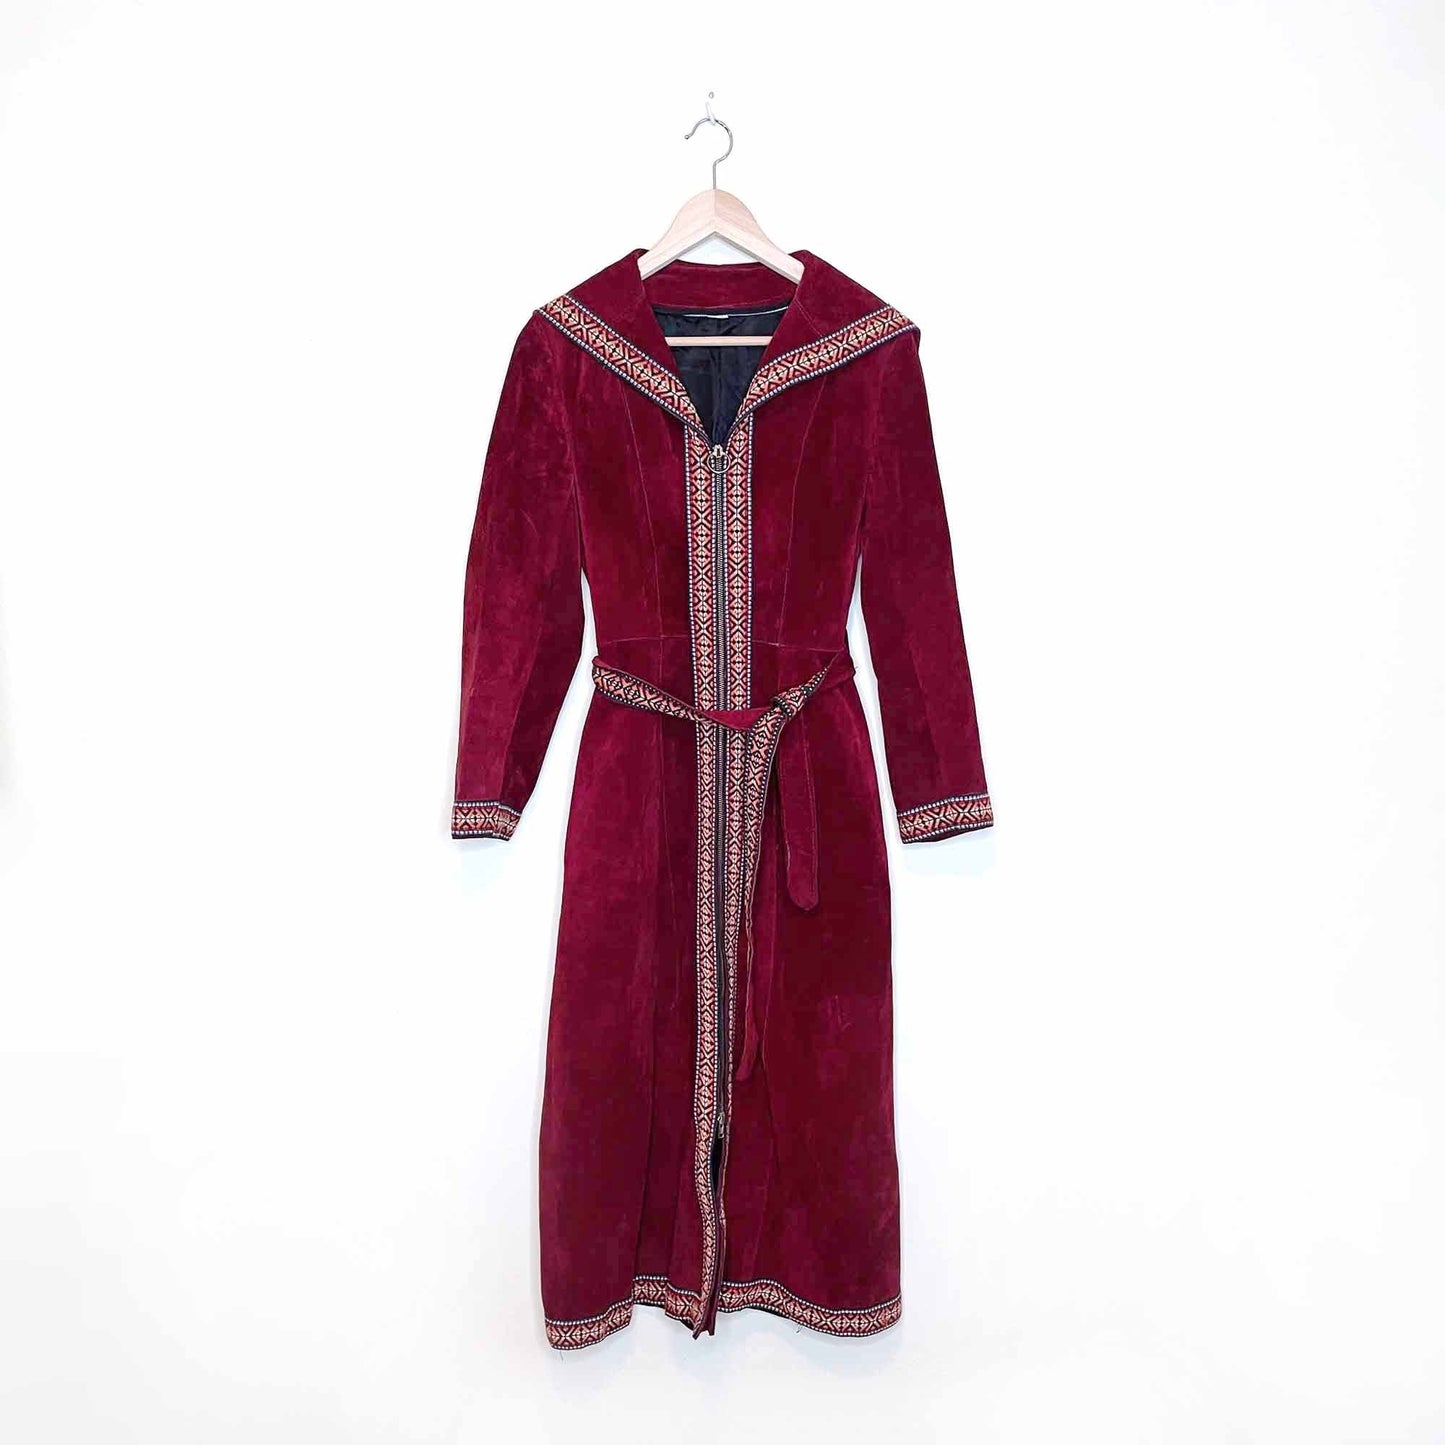 vintage 70's red suede long jacket with woven boho trim - size xs/sm